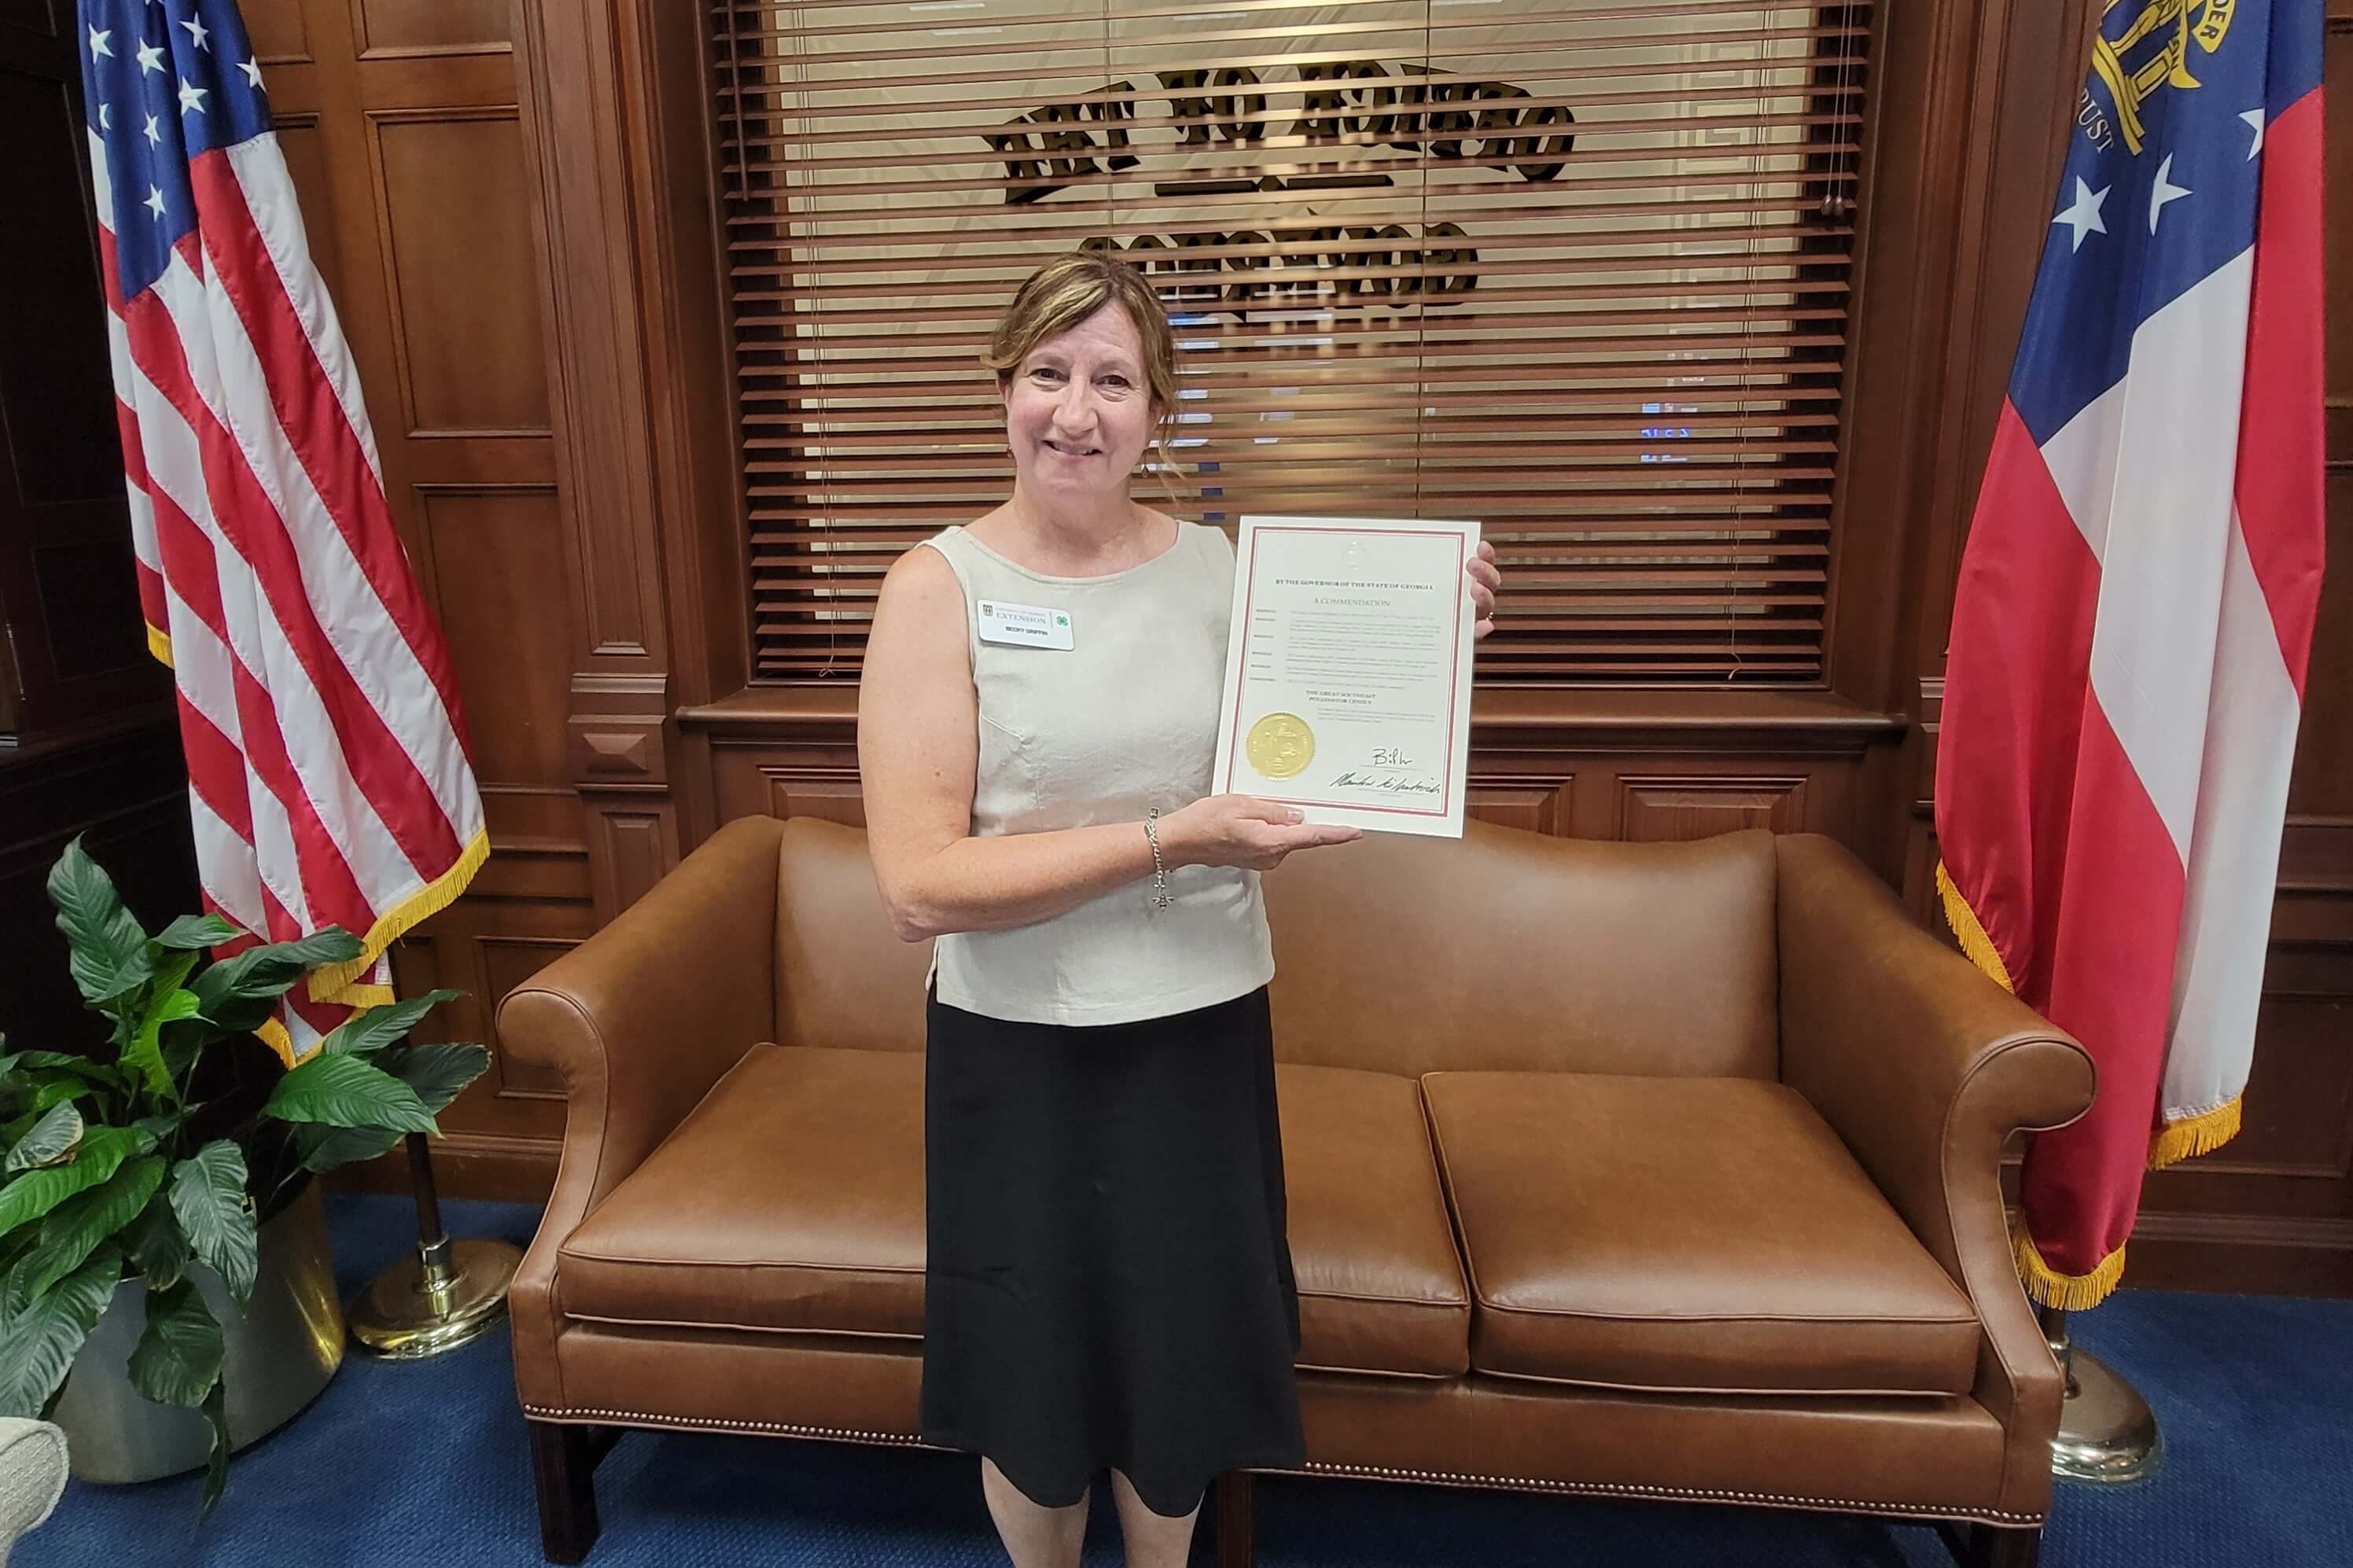 UGA Extension coordinator and census creator Becky Griffin holds a commendation from Georgia Gov. Brian Kemp honoring the Great Southeast Pollinator Census citizen-science initiative, which is in its fifth year.